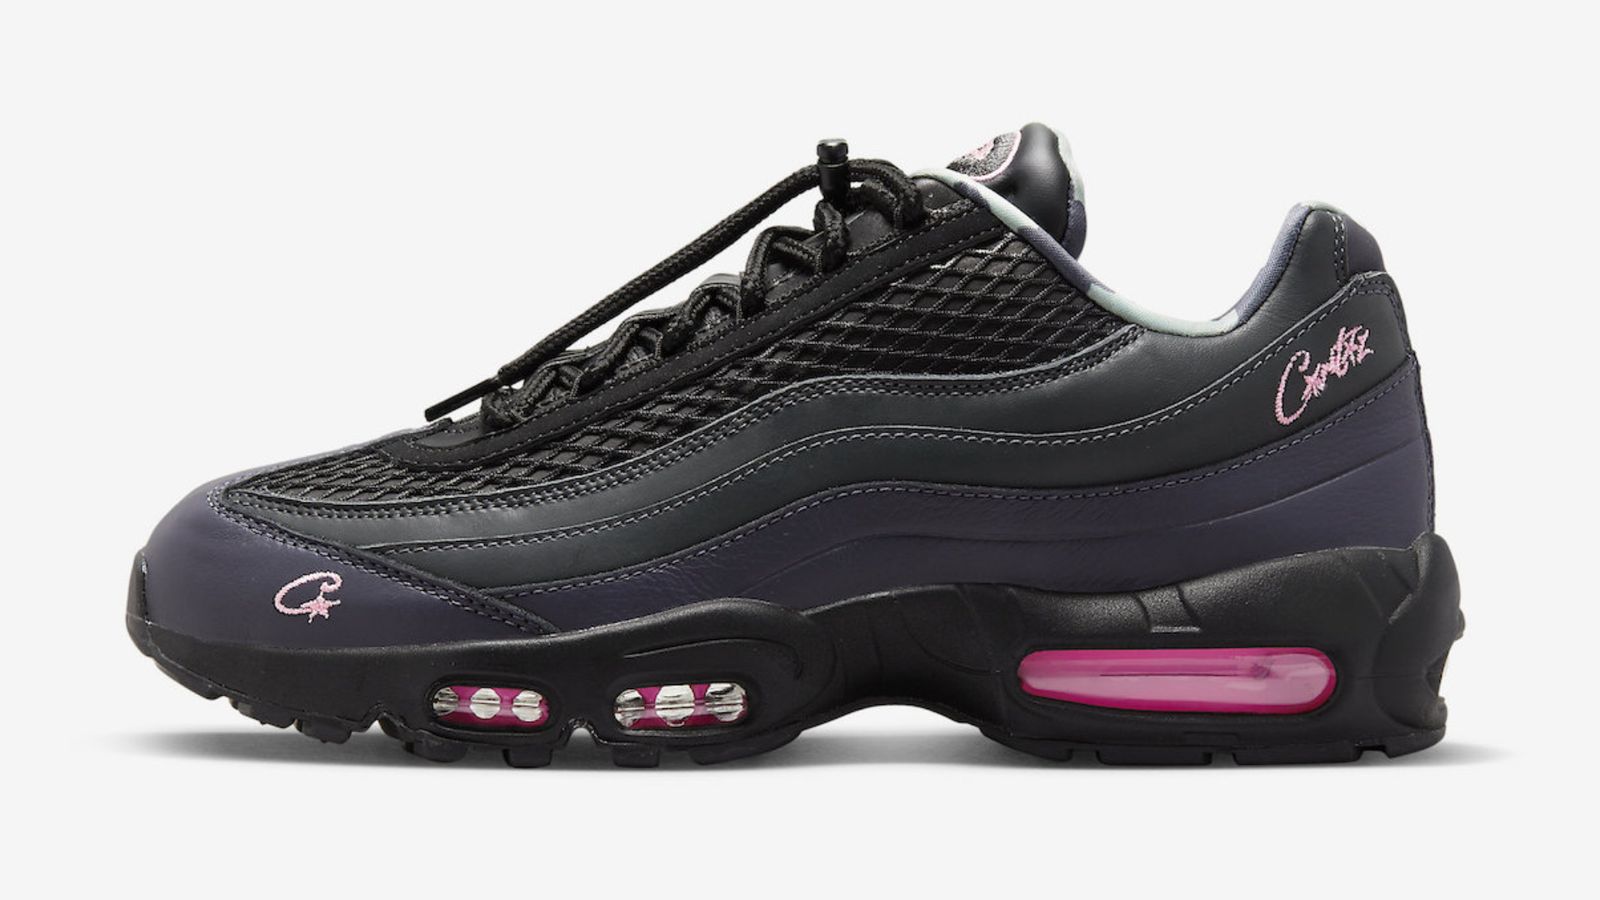 Corteiz x Nike Air Max 95 “Pink Beam” product image of a black sneaker with pink accents and Air bubbles.